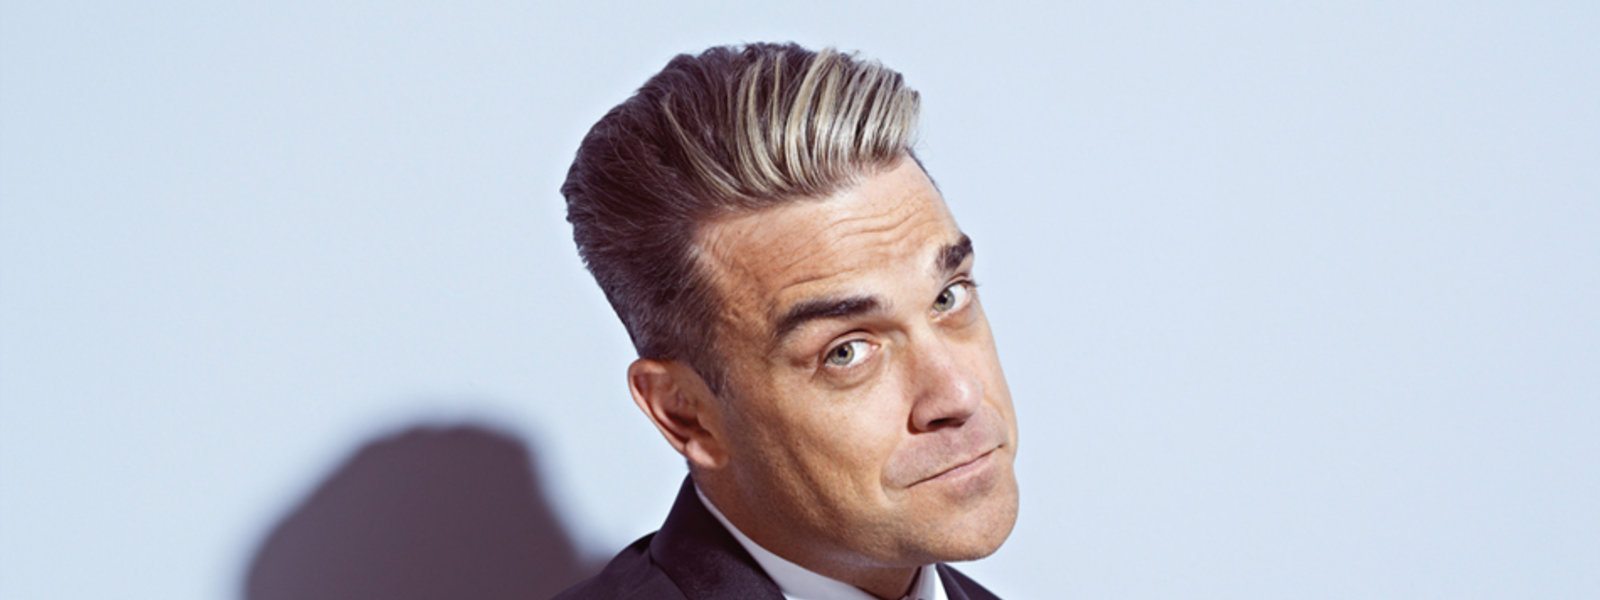 is-robbie-williams-shooting-a-new-music-video-02